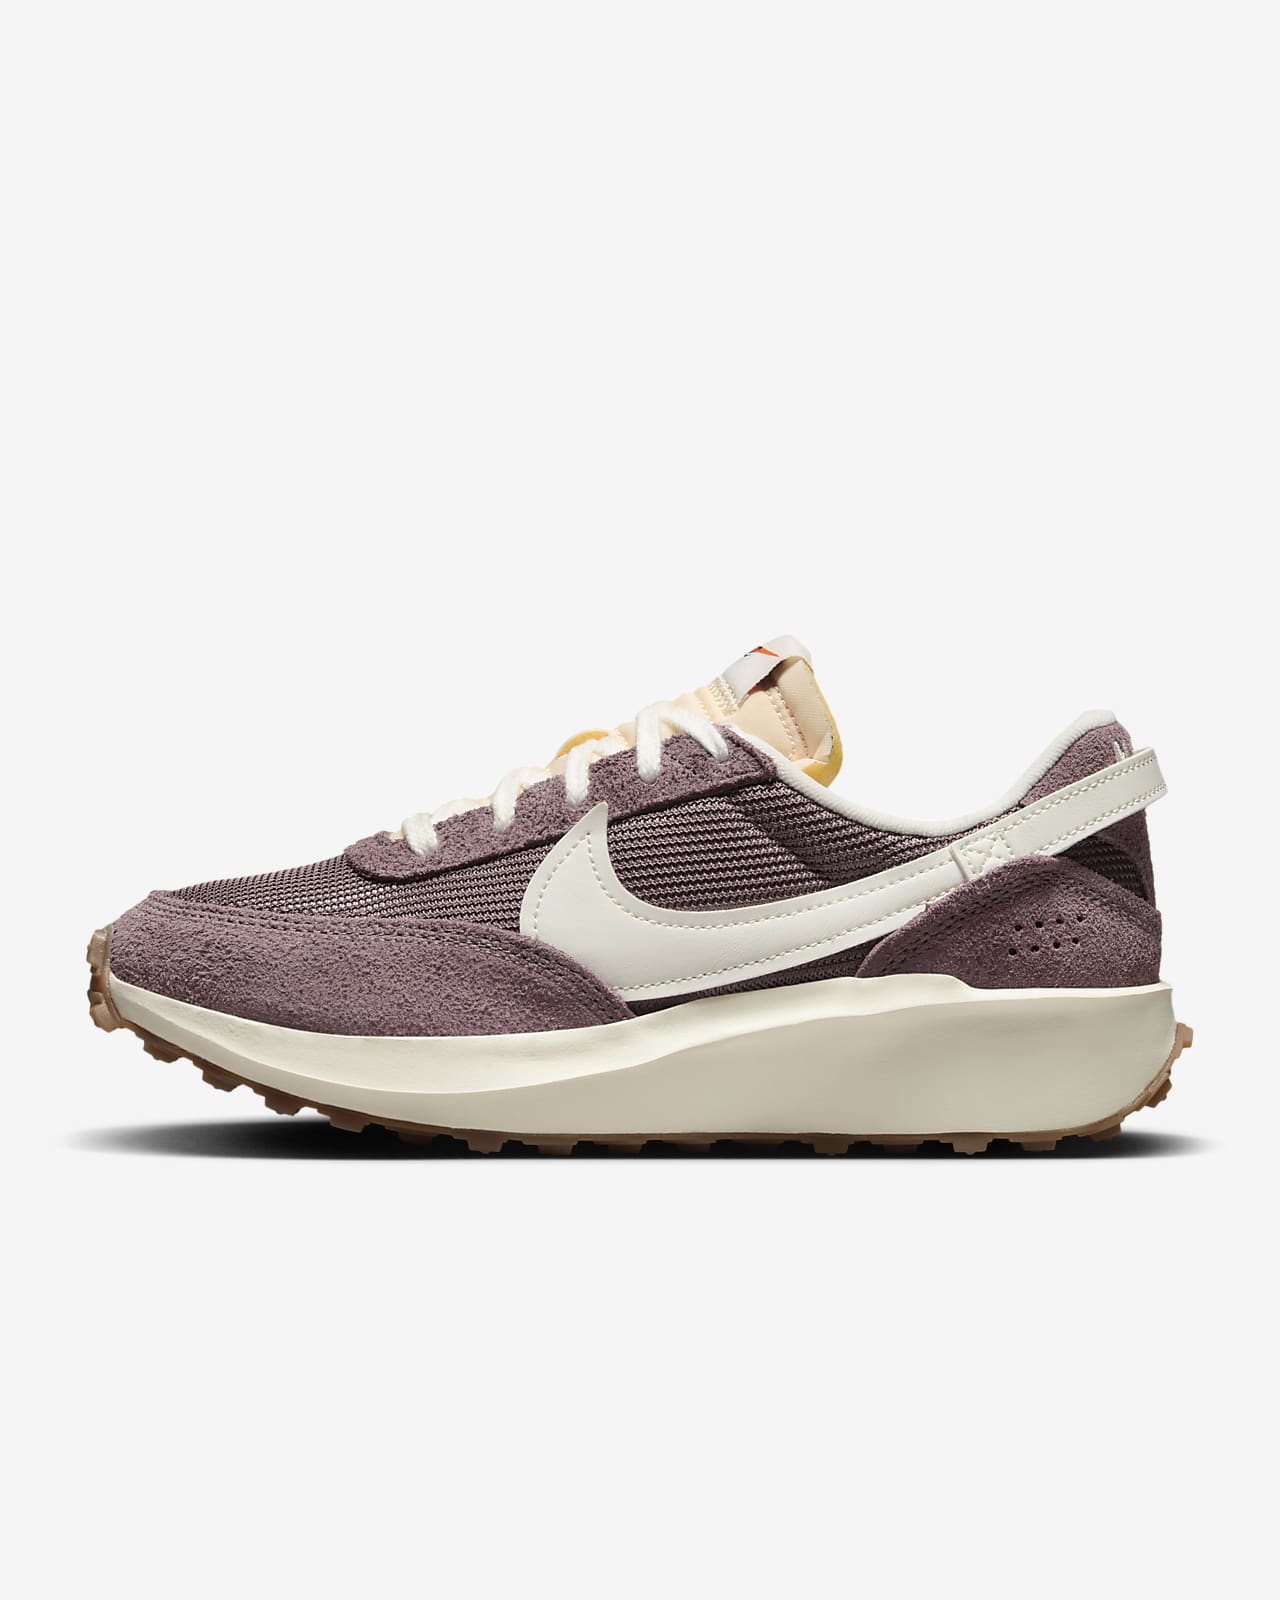 Chaussure Nike Waffle Debut Vintage pour femme